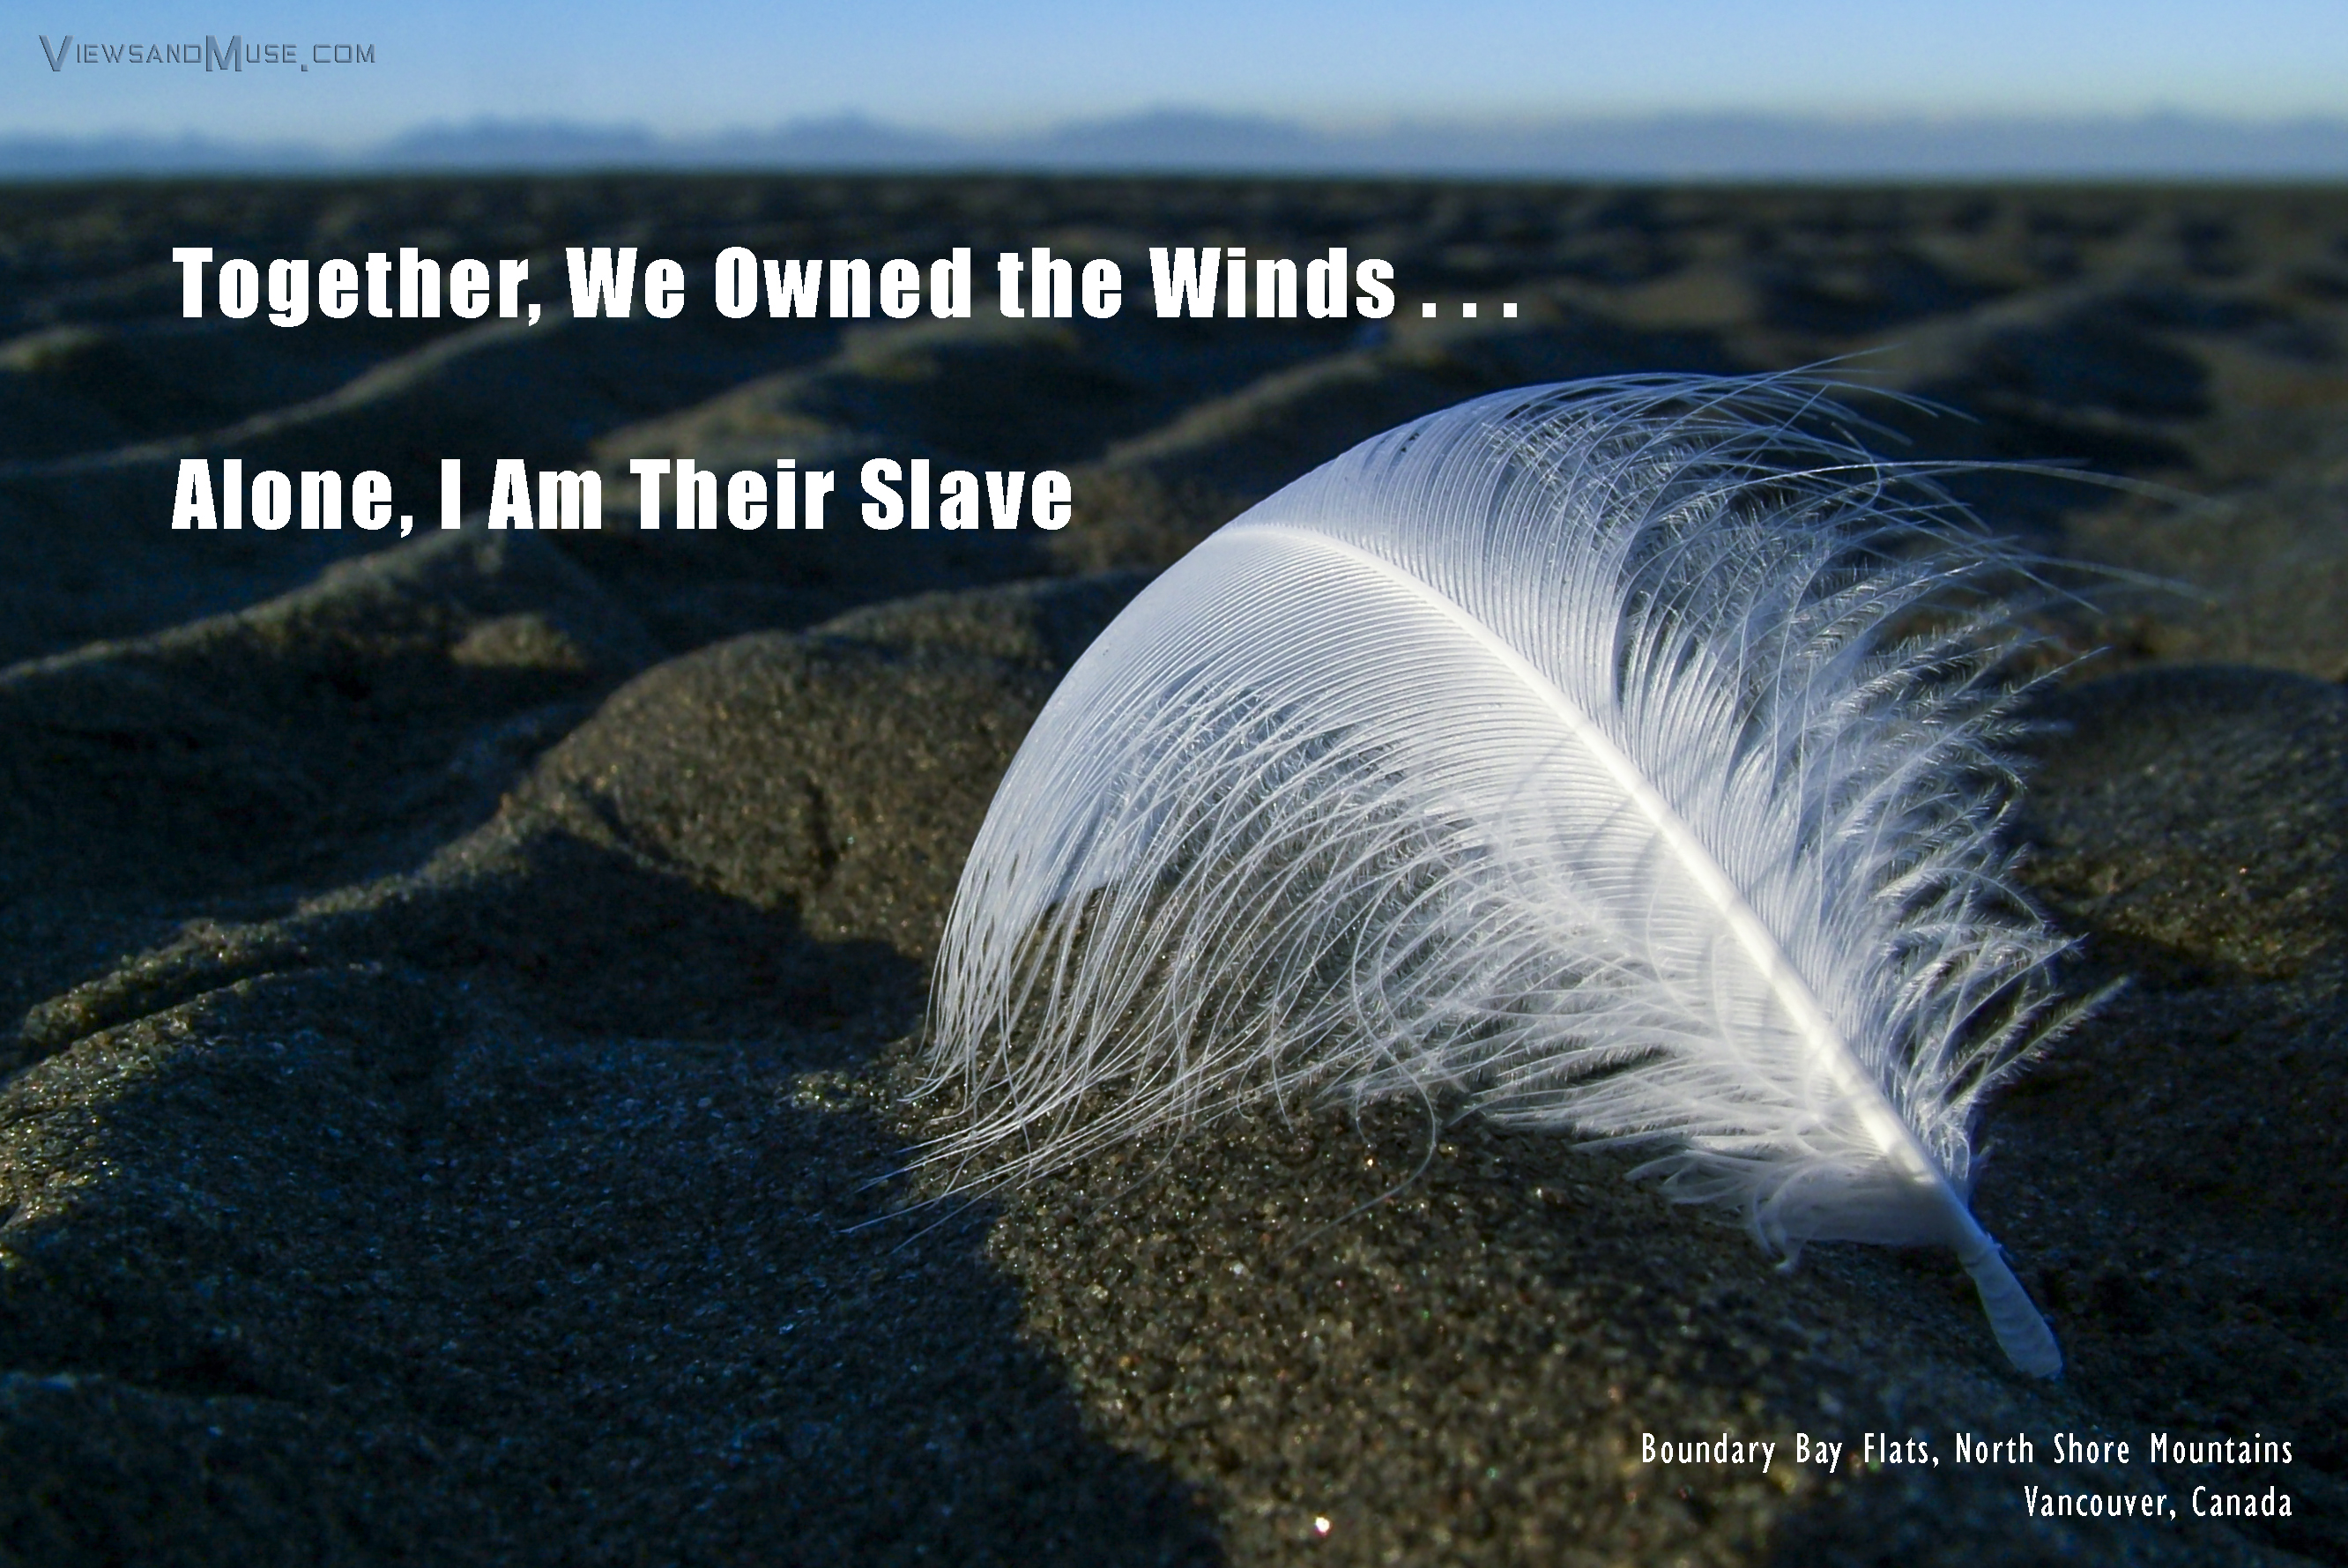 Together, we owned the winds. Alone, I am their slave.